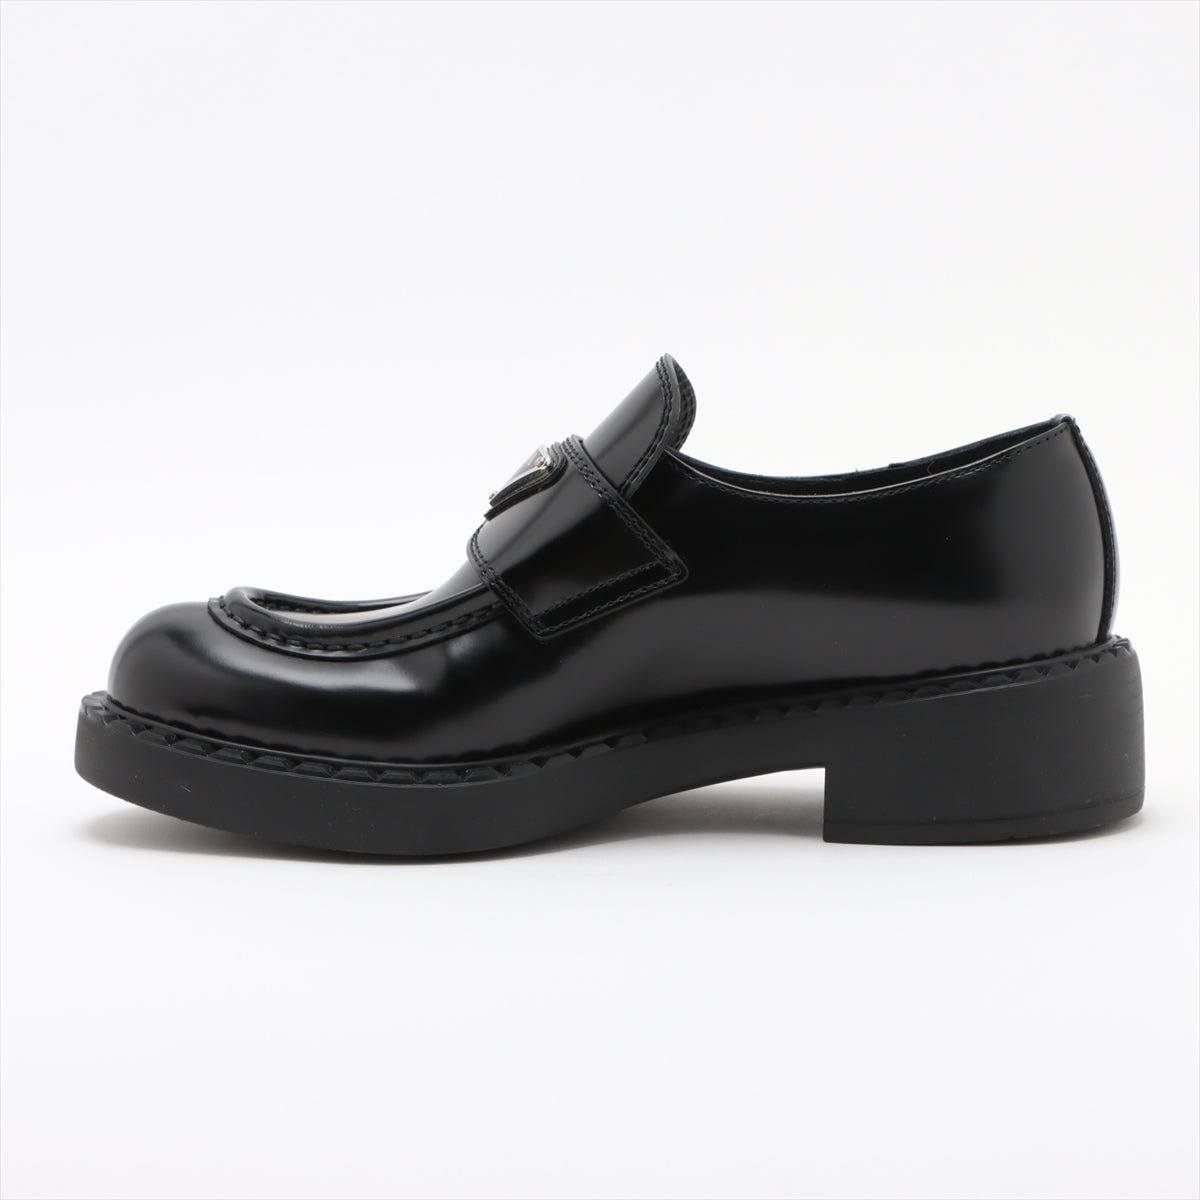 Prada Chocolate Leather Loafer 37 1/2 Ladies' Black Triangle logo box There is a bag